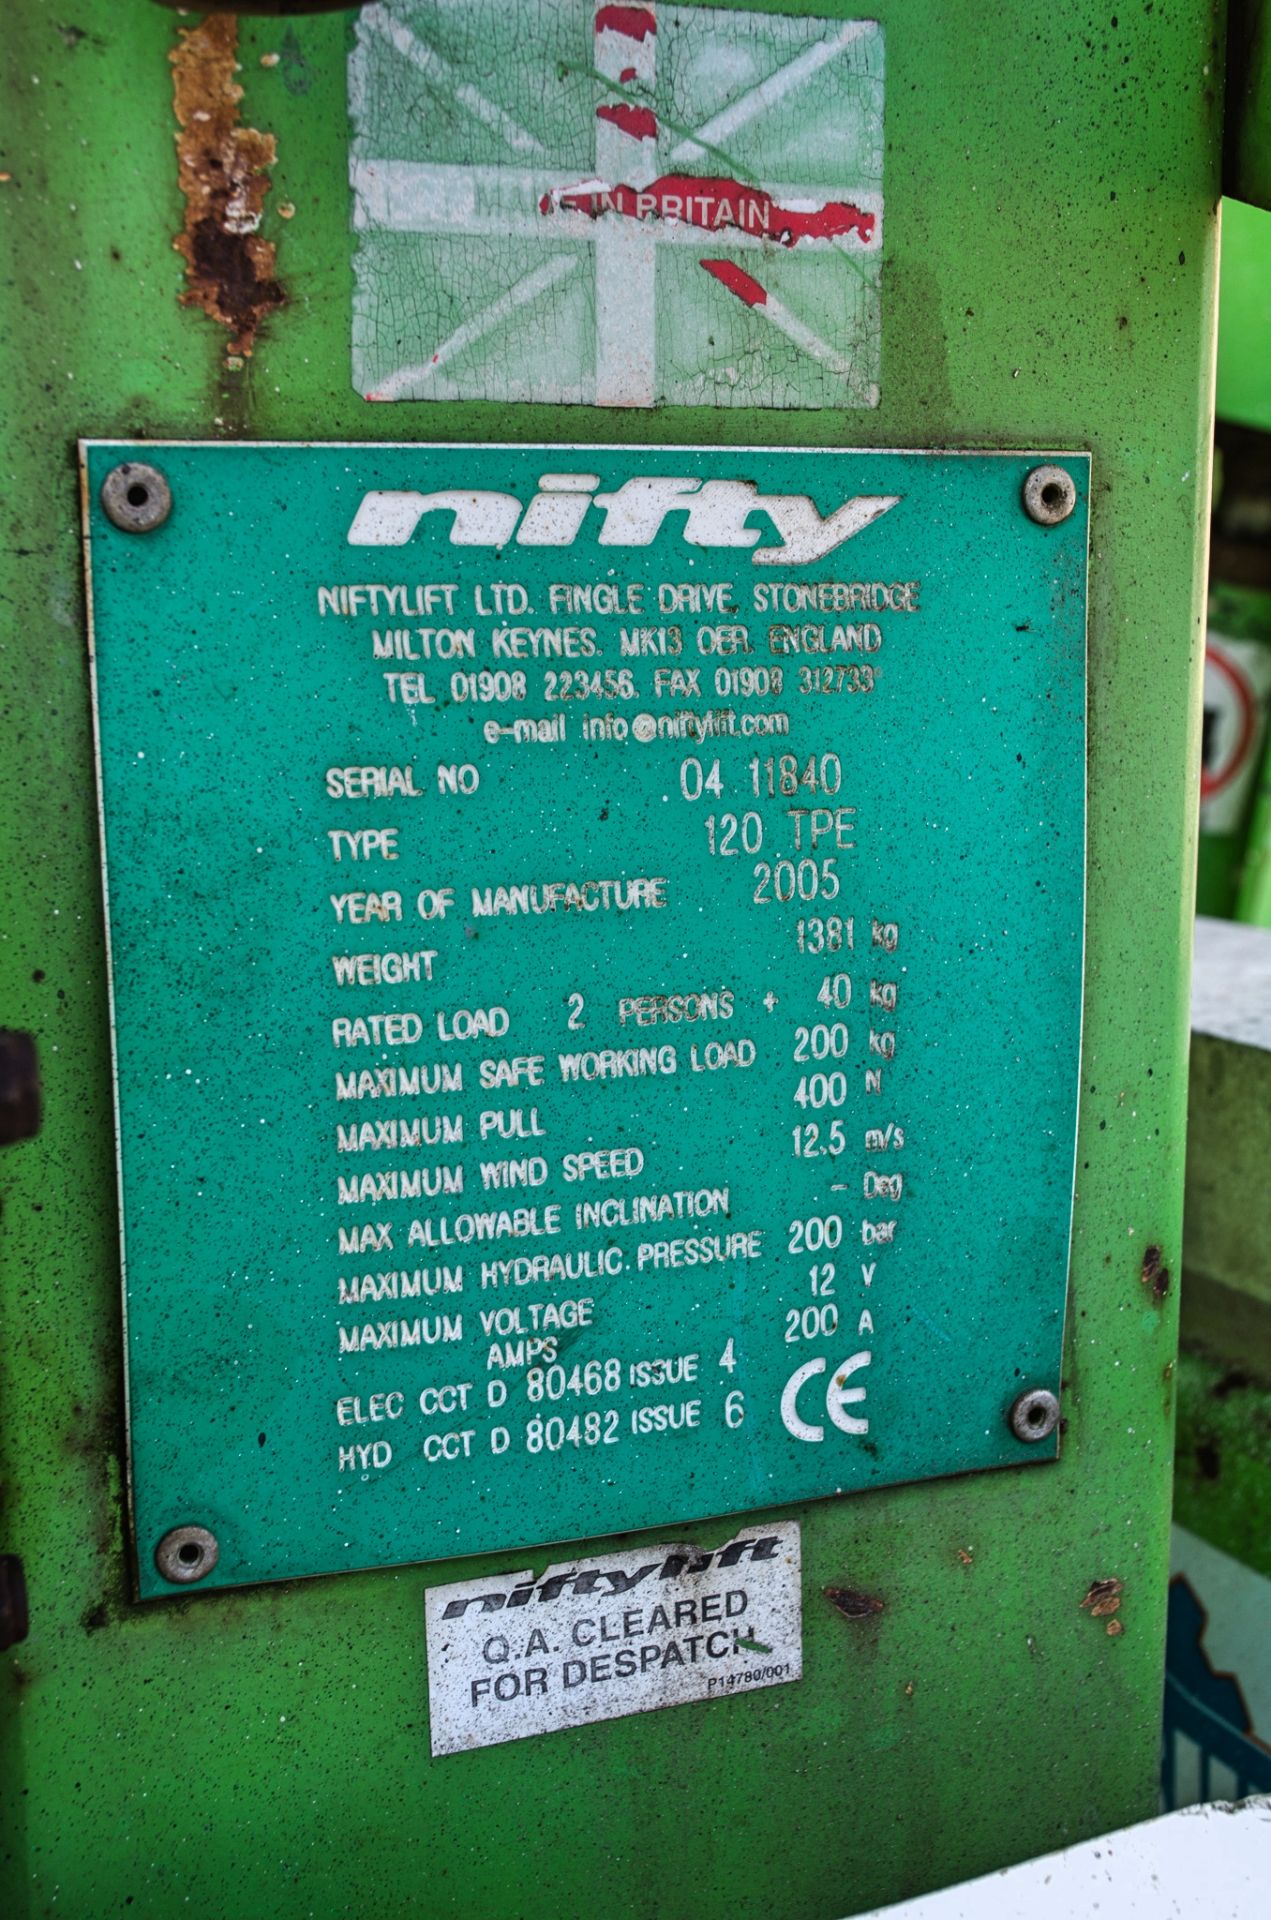 Nifty 120 TPE fast tow battery/petrol drive articulated boom lift Year: 2005 S/N: 11840 - Image 14 of 14